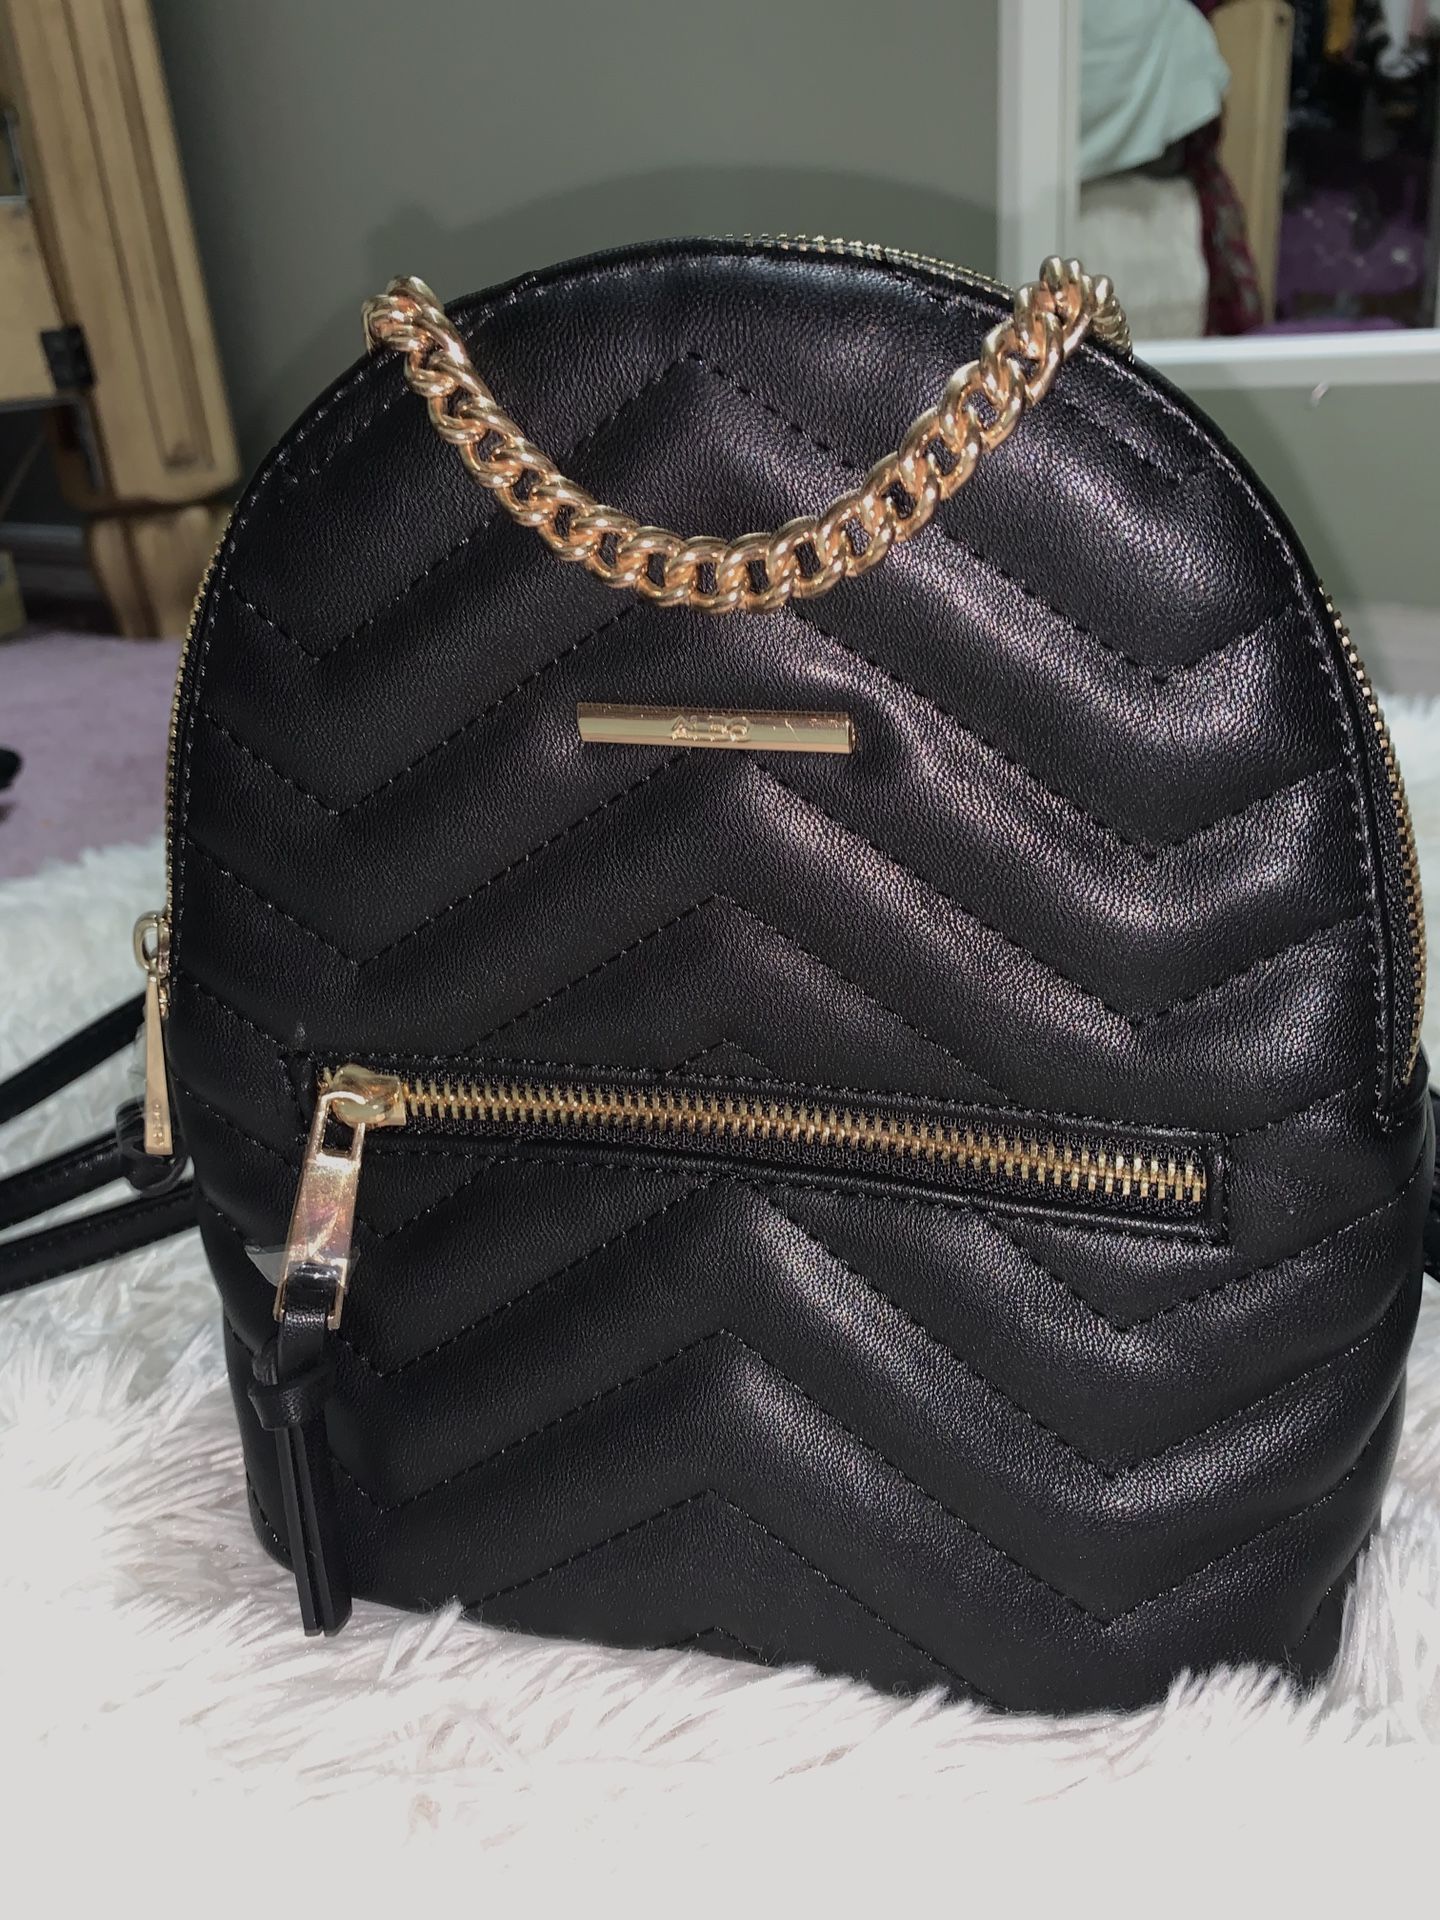 ALDO mini quilted black backpack new